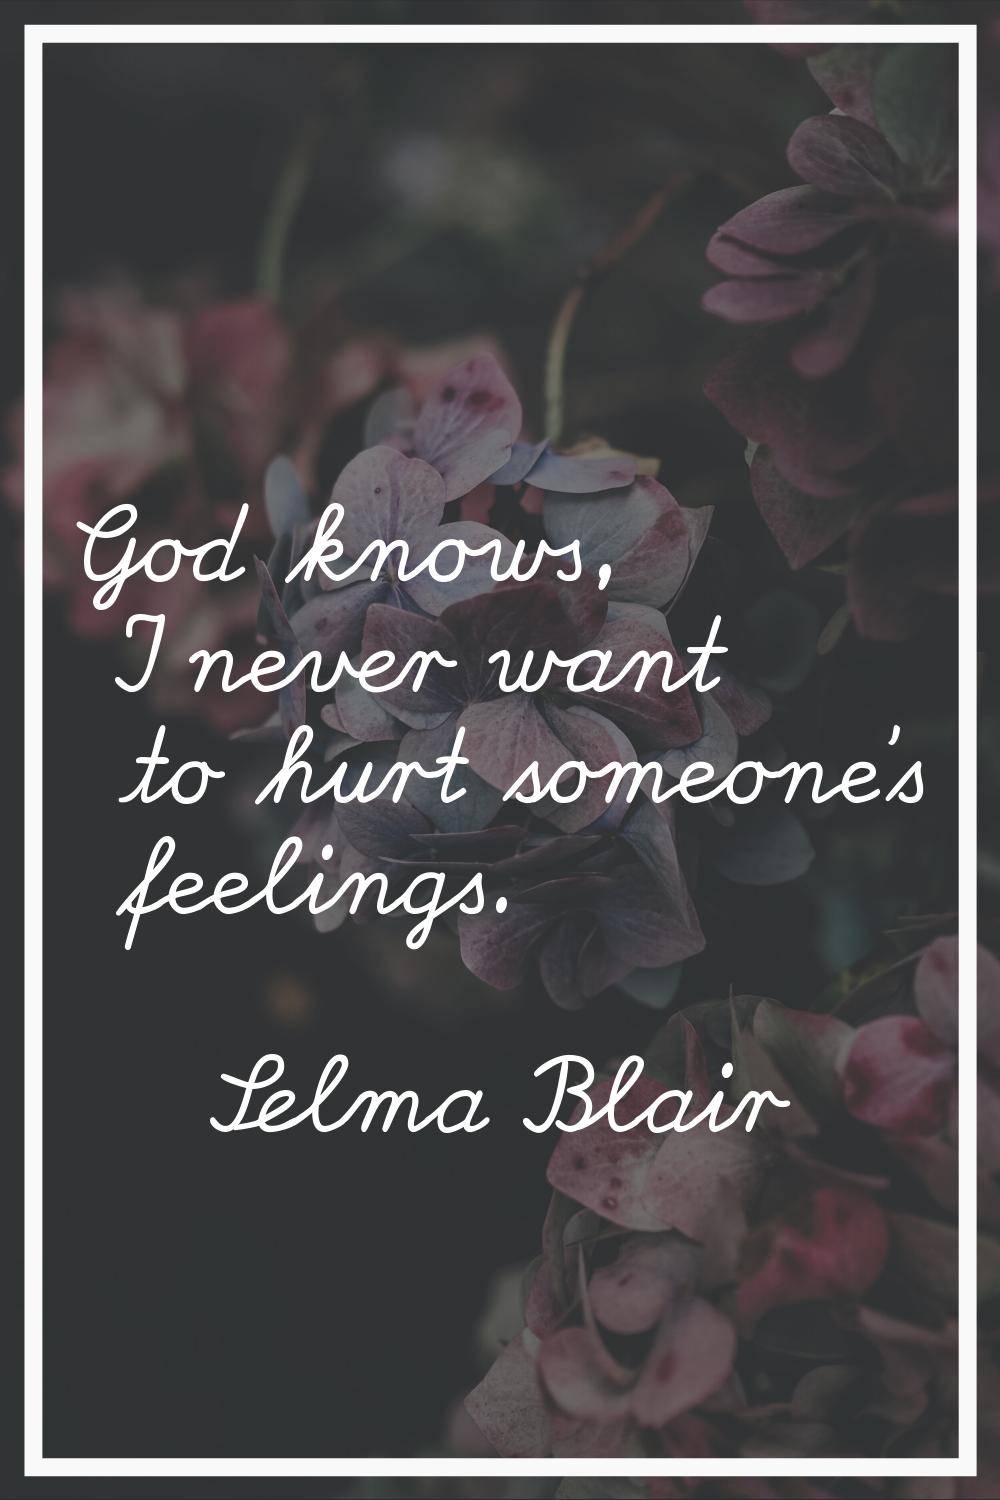 God knows, I never want to hurt someone's feelings.